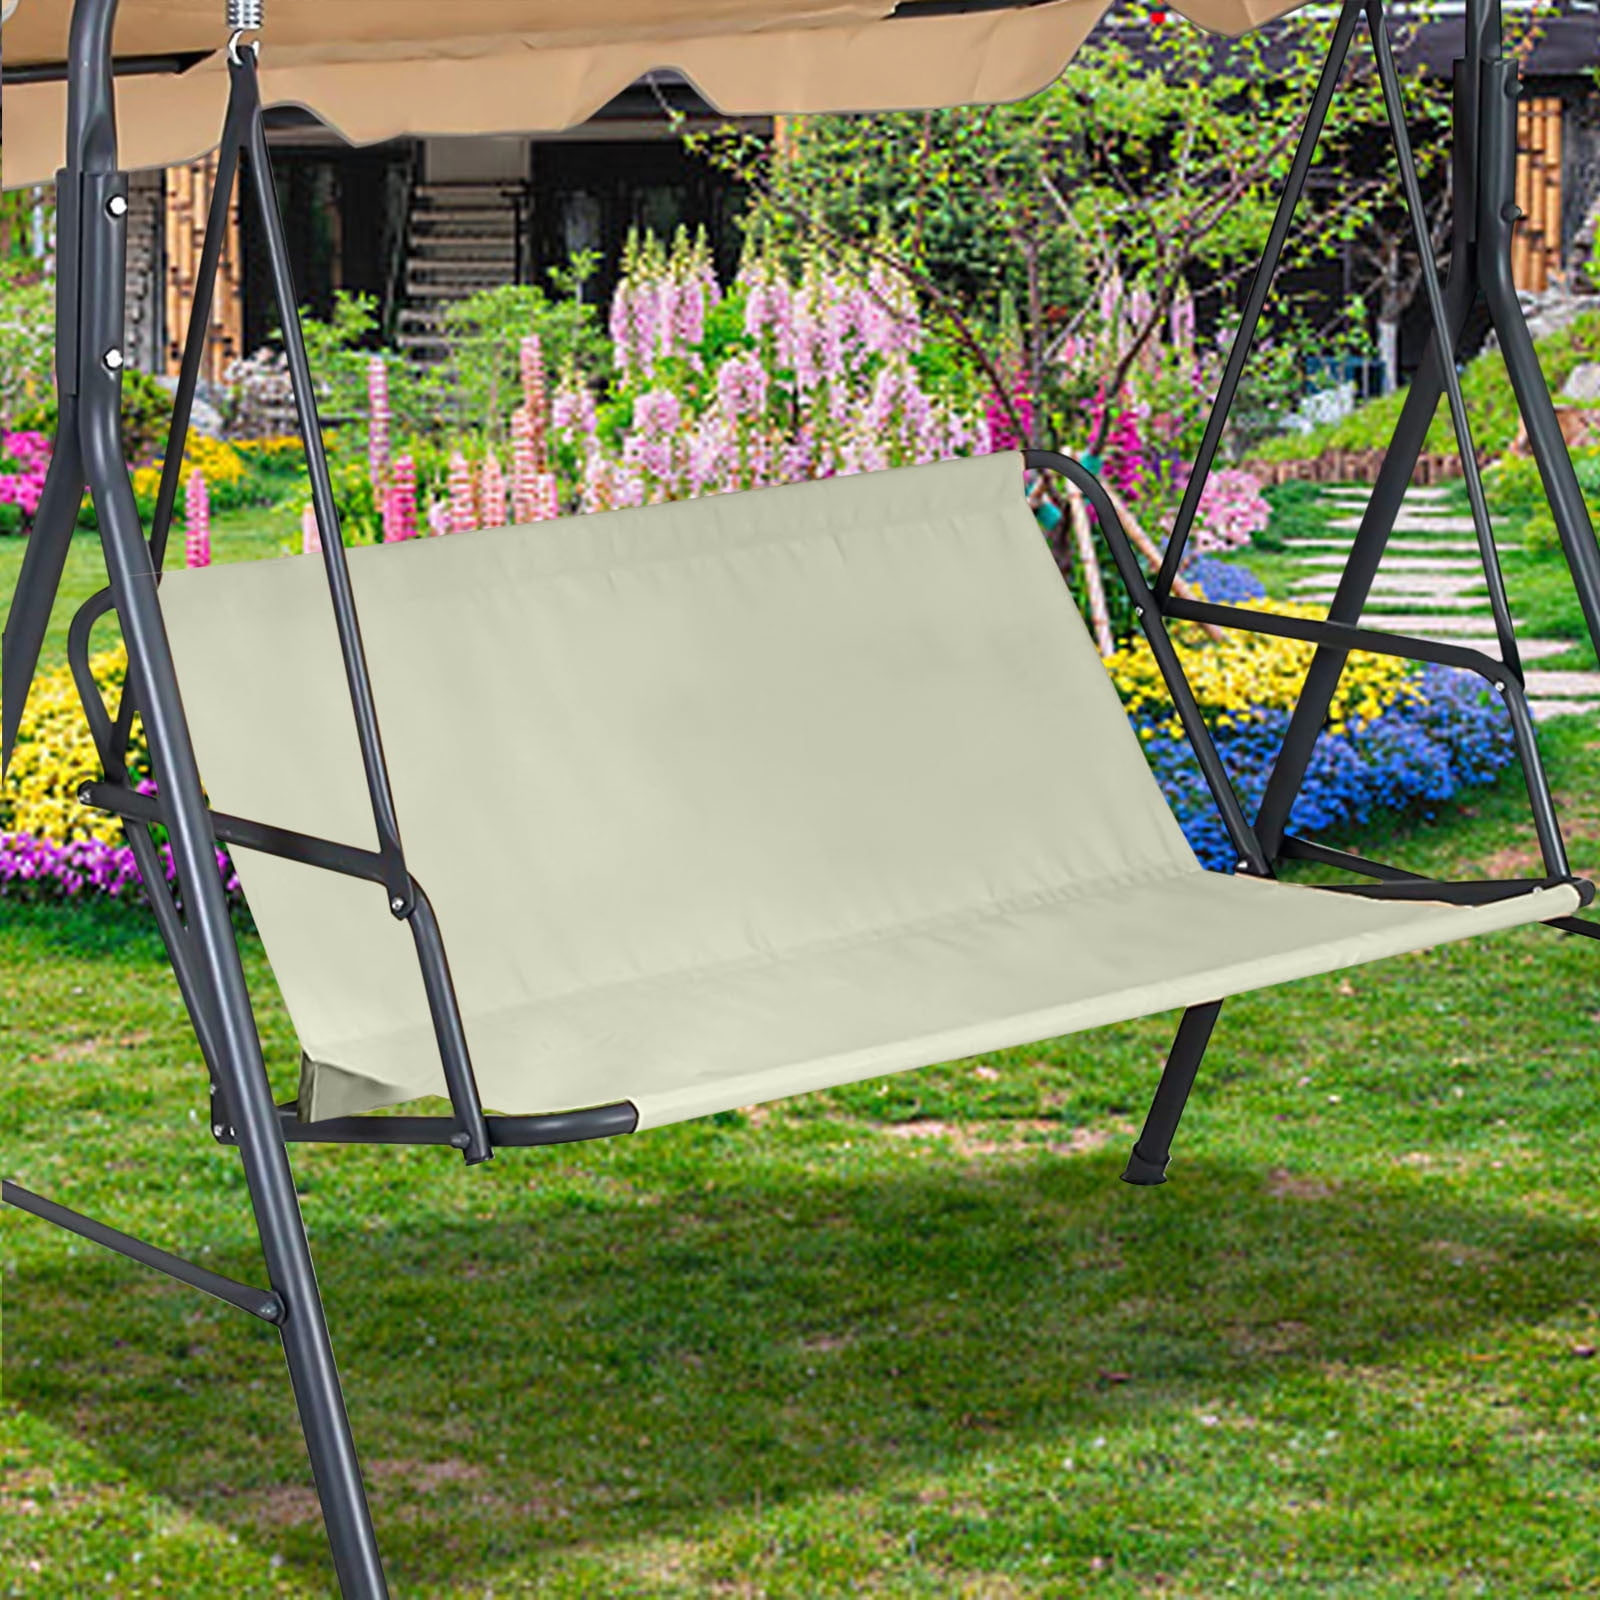  Meimond Swing Cushion 3 Seat 60 Inch,Outdoor Porch Waterproof  Patio Bench Back Cushion, Leisure Chair Couch Cushion,4 Inch Thick Patio  Garden Furniture Replacement Seat Cushion(Color:Grey) : Patio, Lawn & Garden